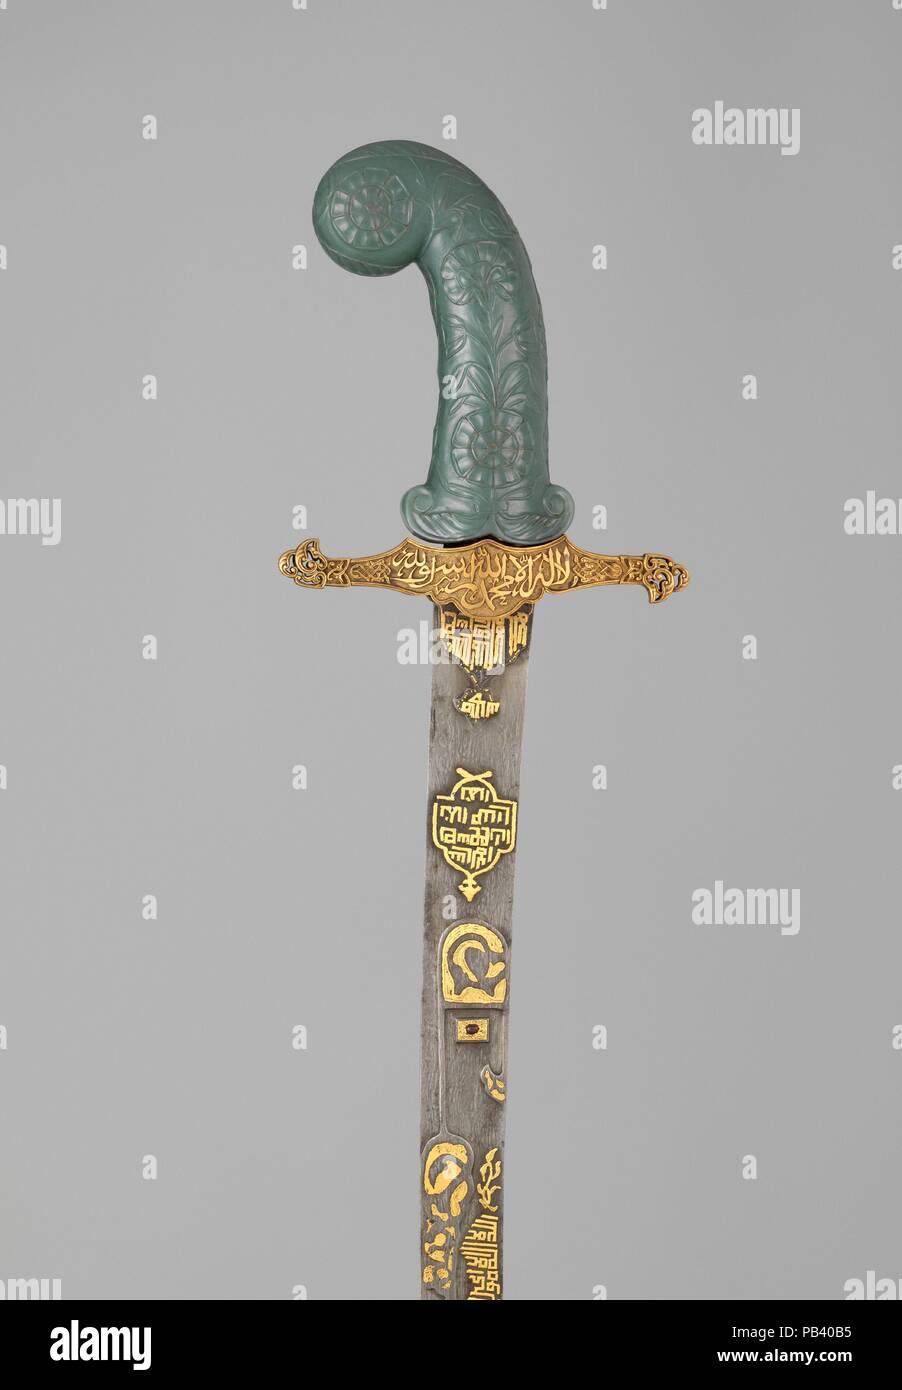 Sword (Kilij). Culture: hilt and guard, Turkish; grip, Indian. Dimensions: L. 37 5/8 in. (95.6 cm). Date: hilt and guard, 19th century; grip, possibly 18th century.  The inscriptions on the sword invokes Allah, the Prophet Muhammad, and 'Ali. On the sword's blade is the <i>Ayat al-Kursi</i> (Throne Verse, 2:255), a popular talisman throughout the Islamic world. Museum: Metropolitan Museum of Art, New York, USA. Stock Photo